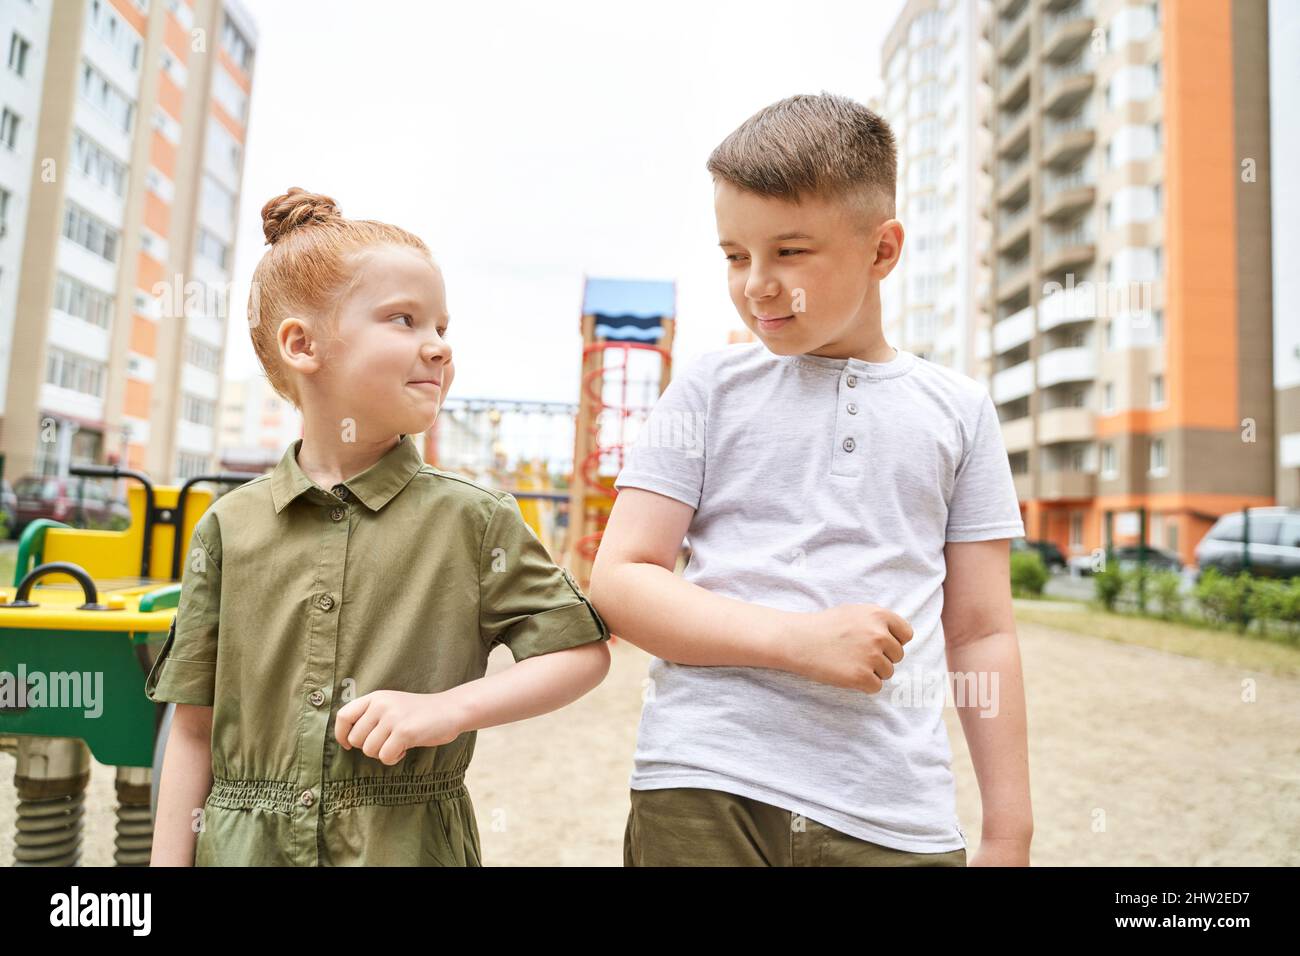 Elbow touch. New normal. Corona virus safety handshake. Boy and girl greating. Family sign. Arm salute gesture. Playground background. Outdoors. Healt Stock Photo